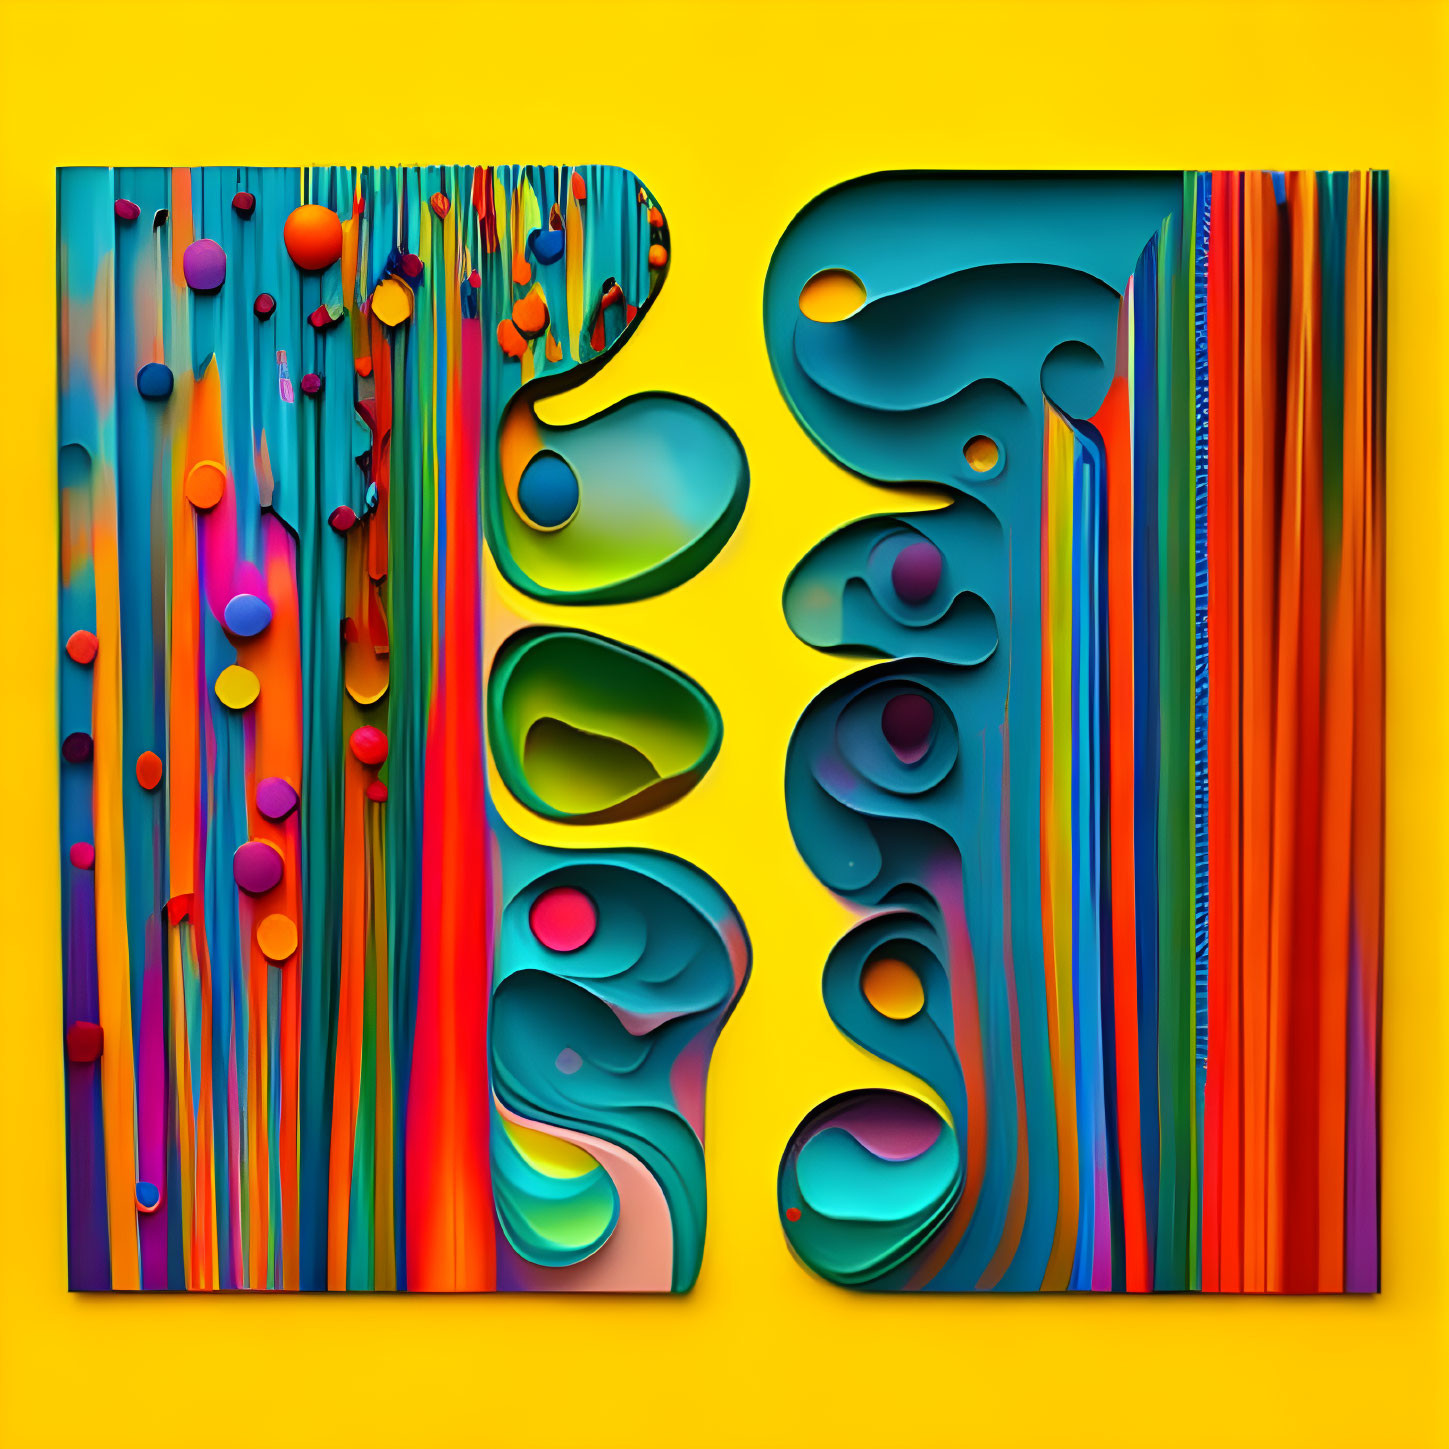 Colorful Paper Art with Layered Cut-Out Shapes and Raised Dots on Yellow Background